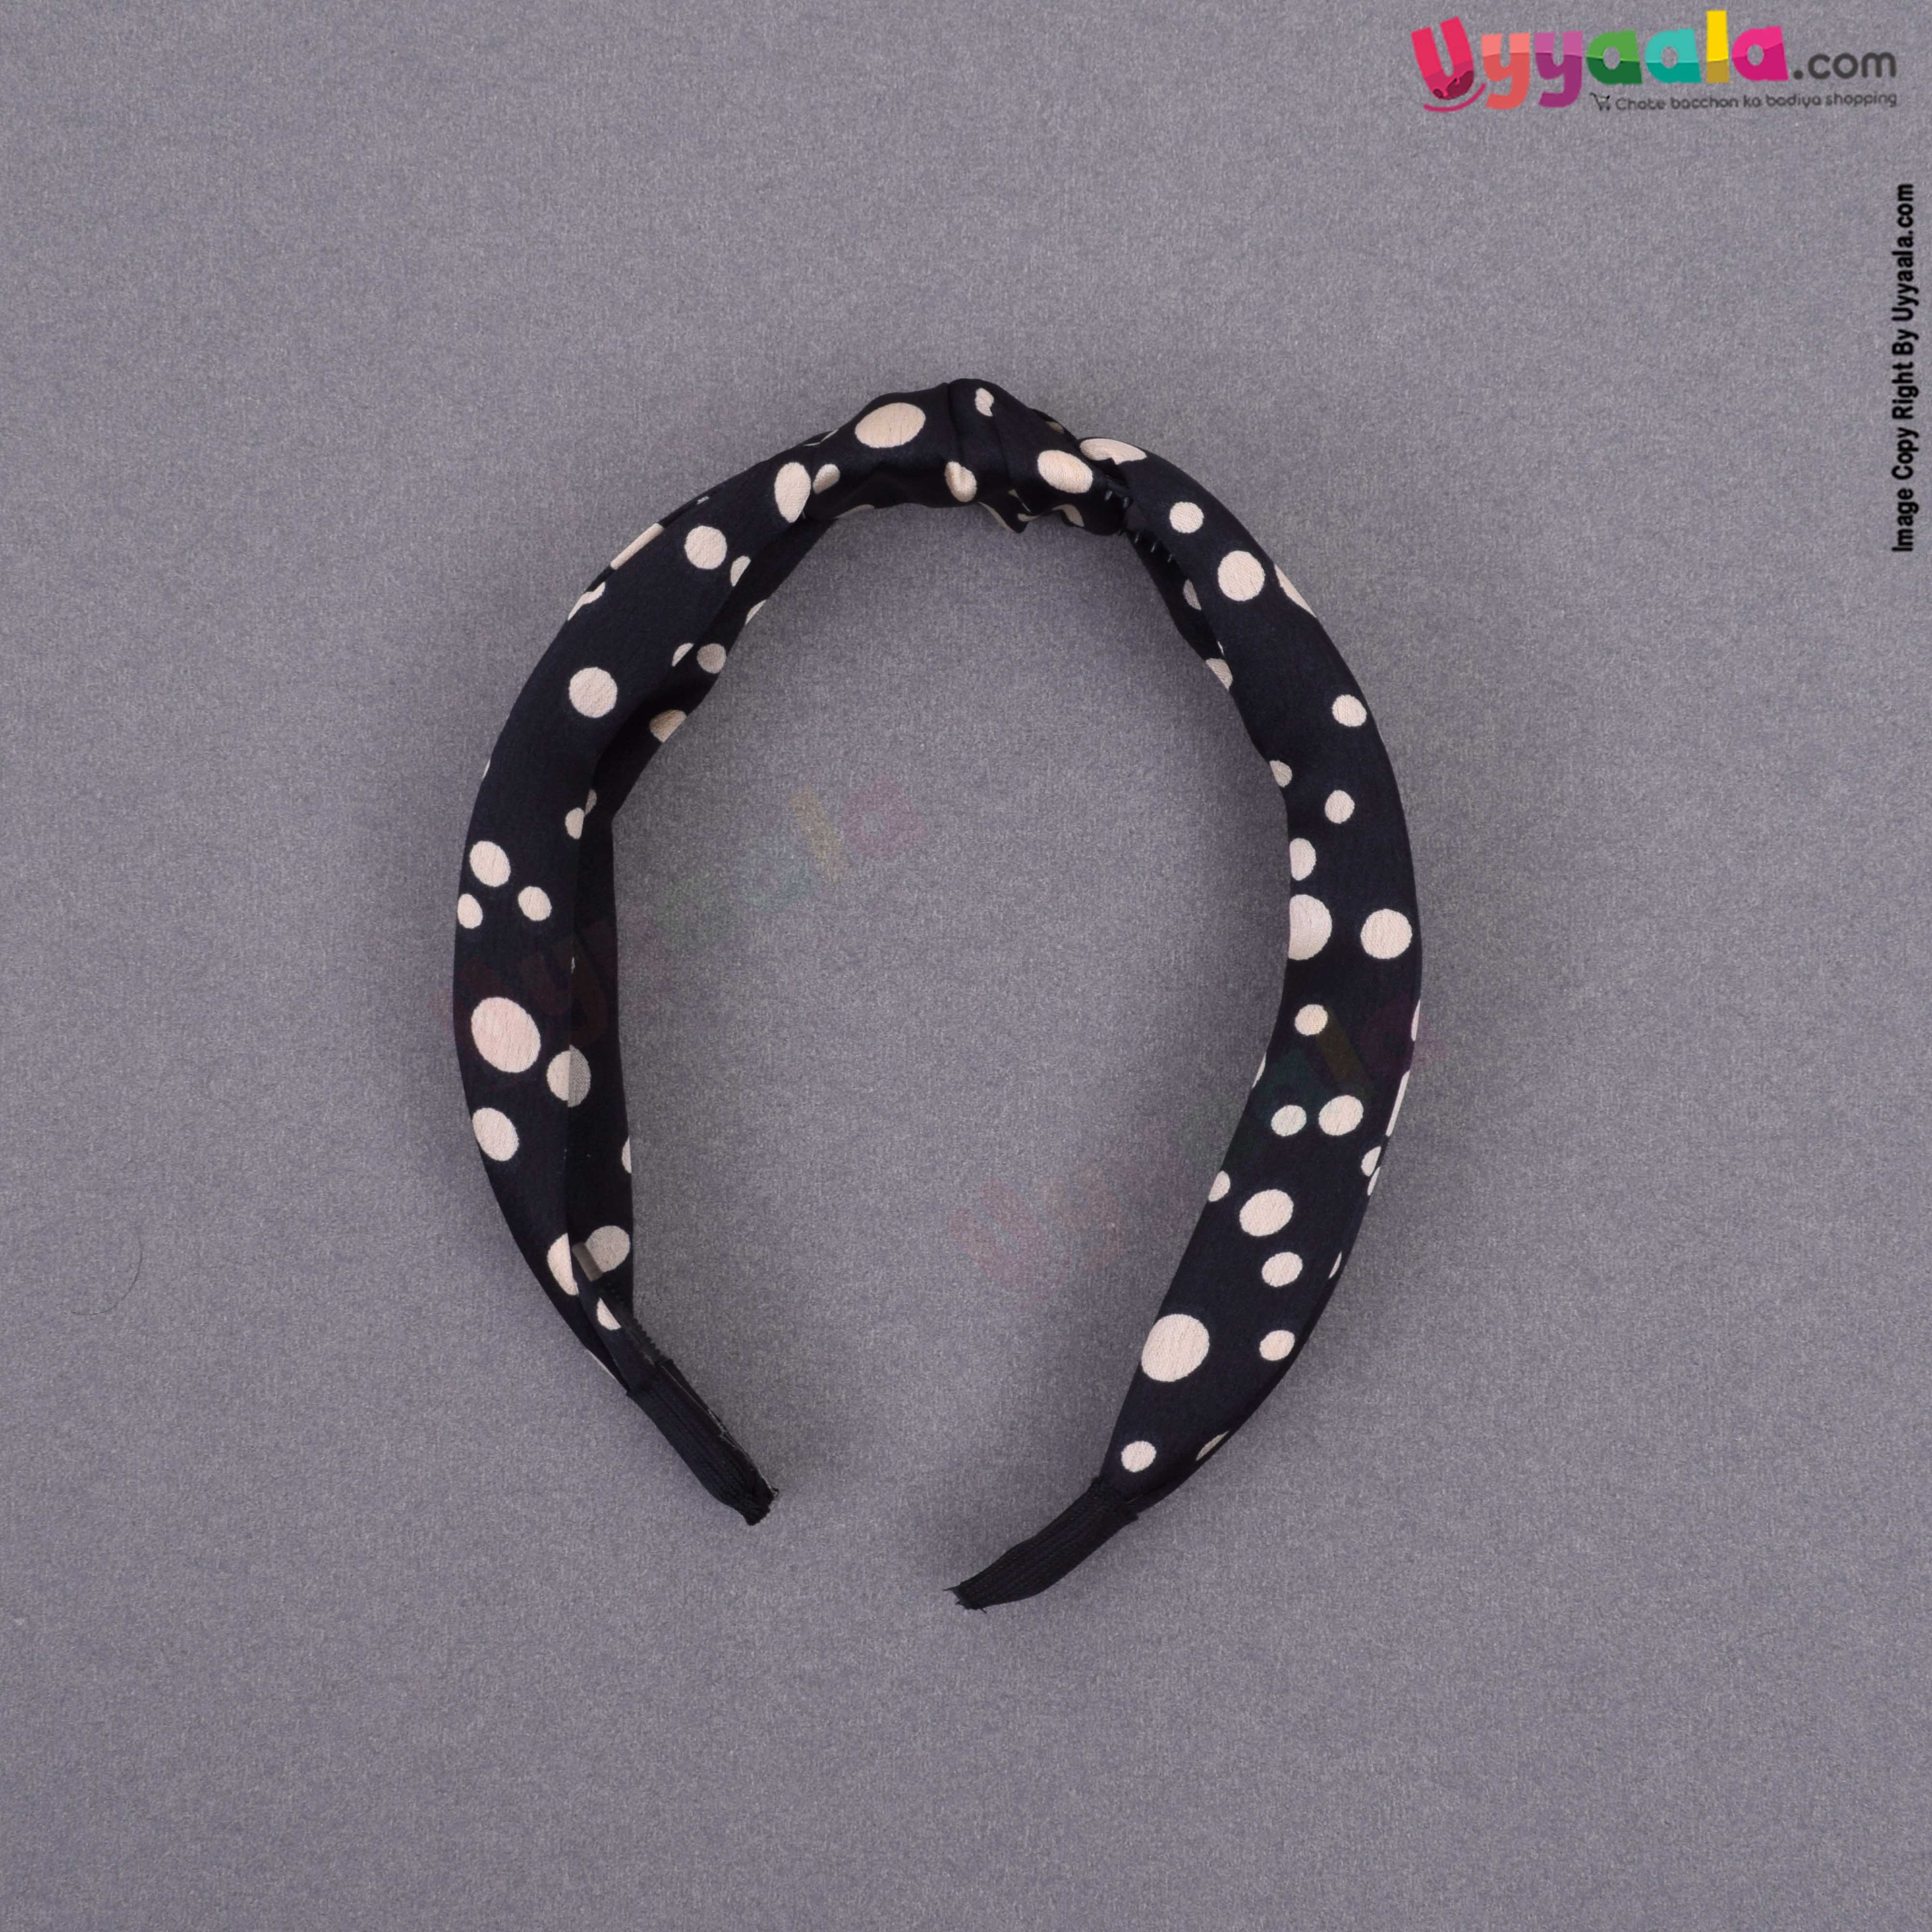 OOMPH Hair Bands : Buy OOMPH Red and Black Fabric Elastic Criss Cross  Knotted Bow Fashion Hair Band Online | Nykaa Fashion.